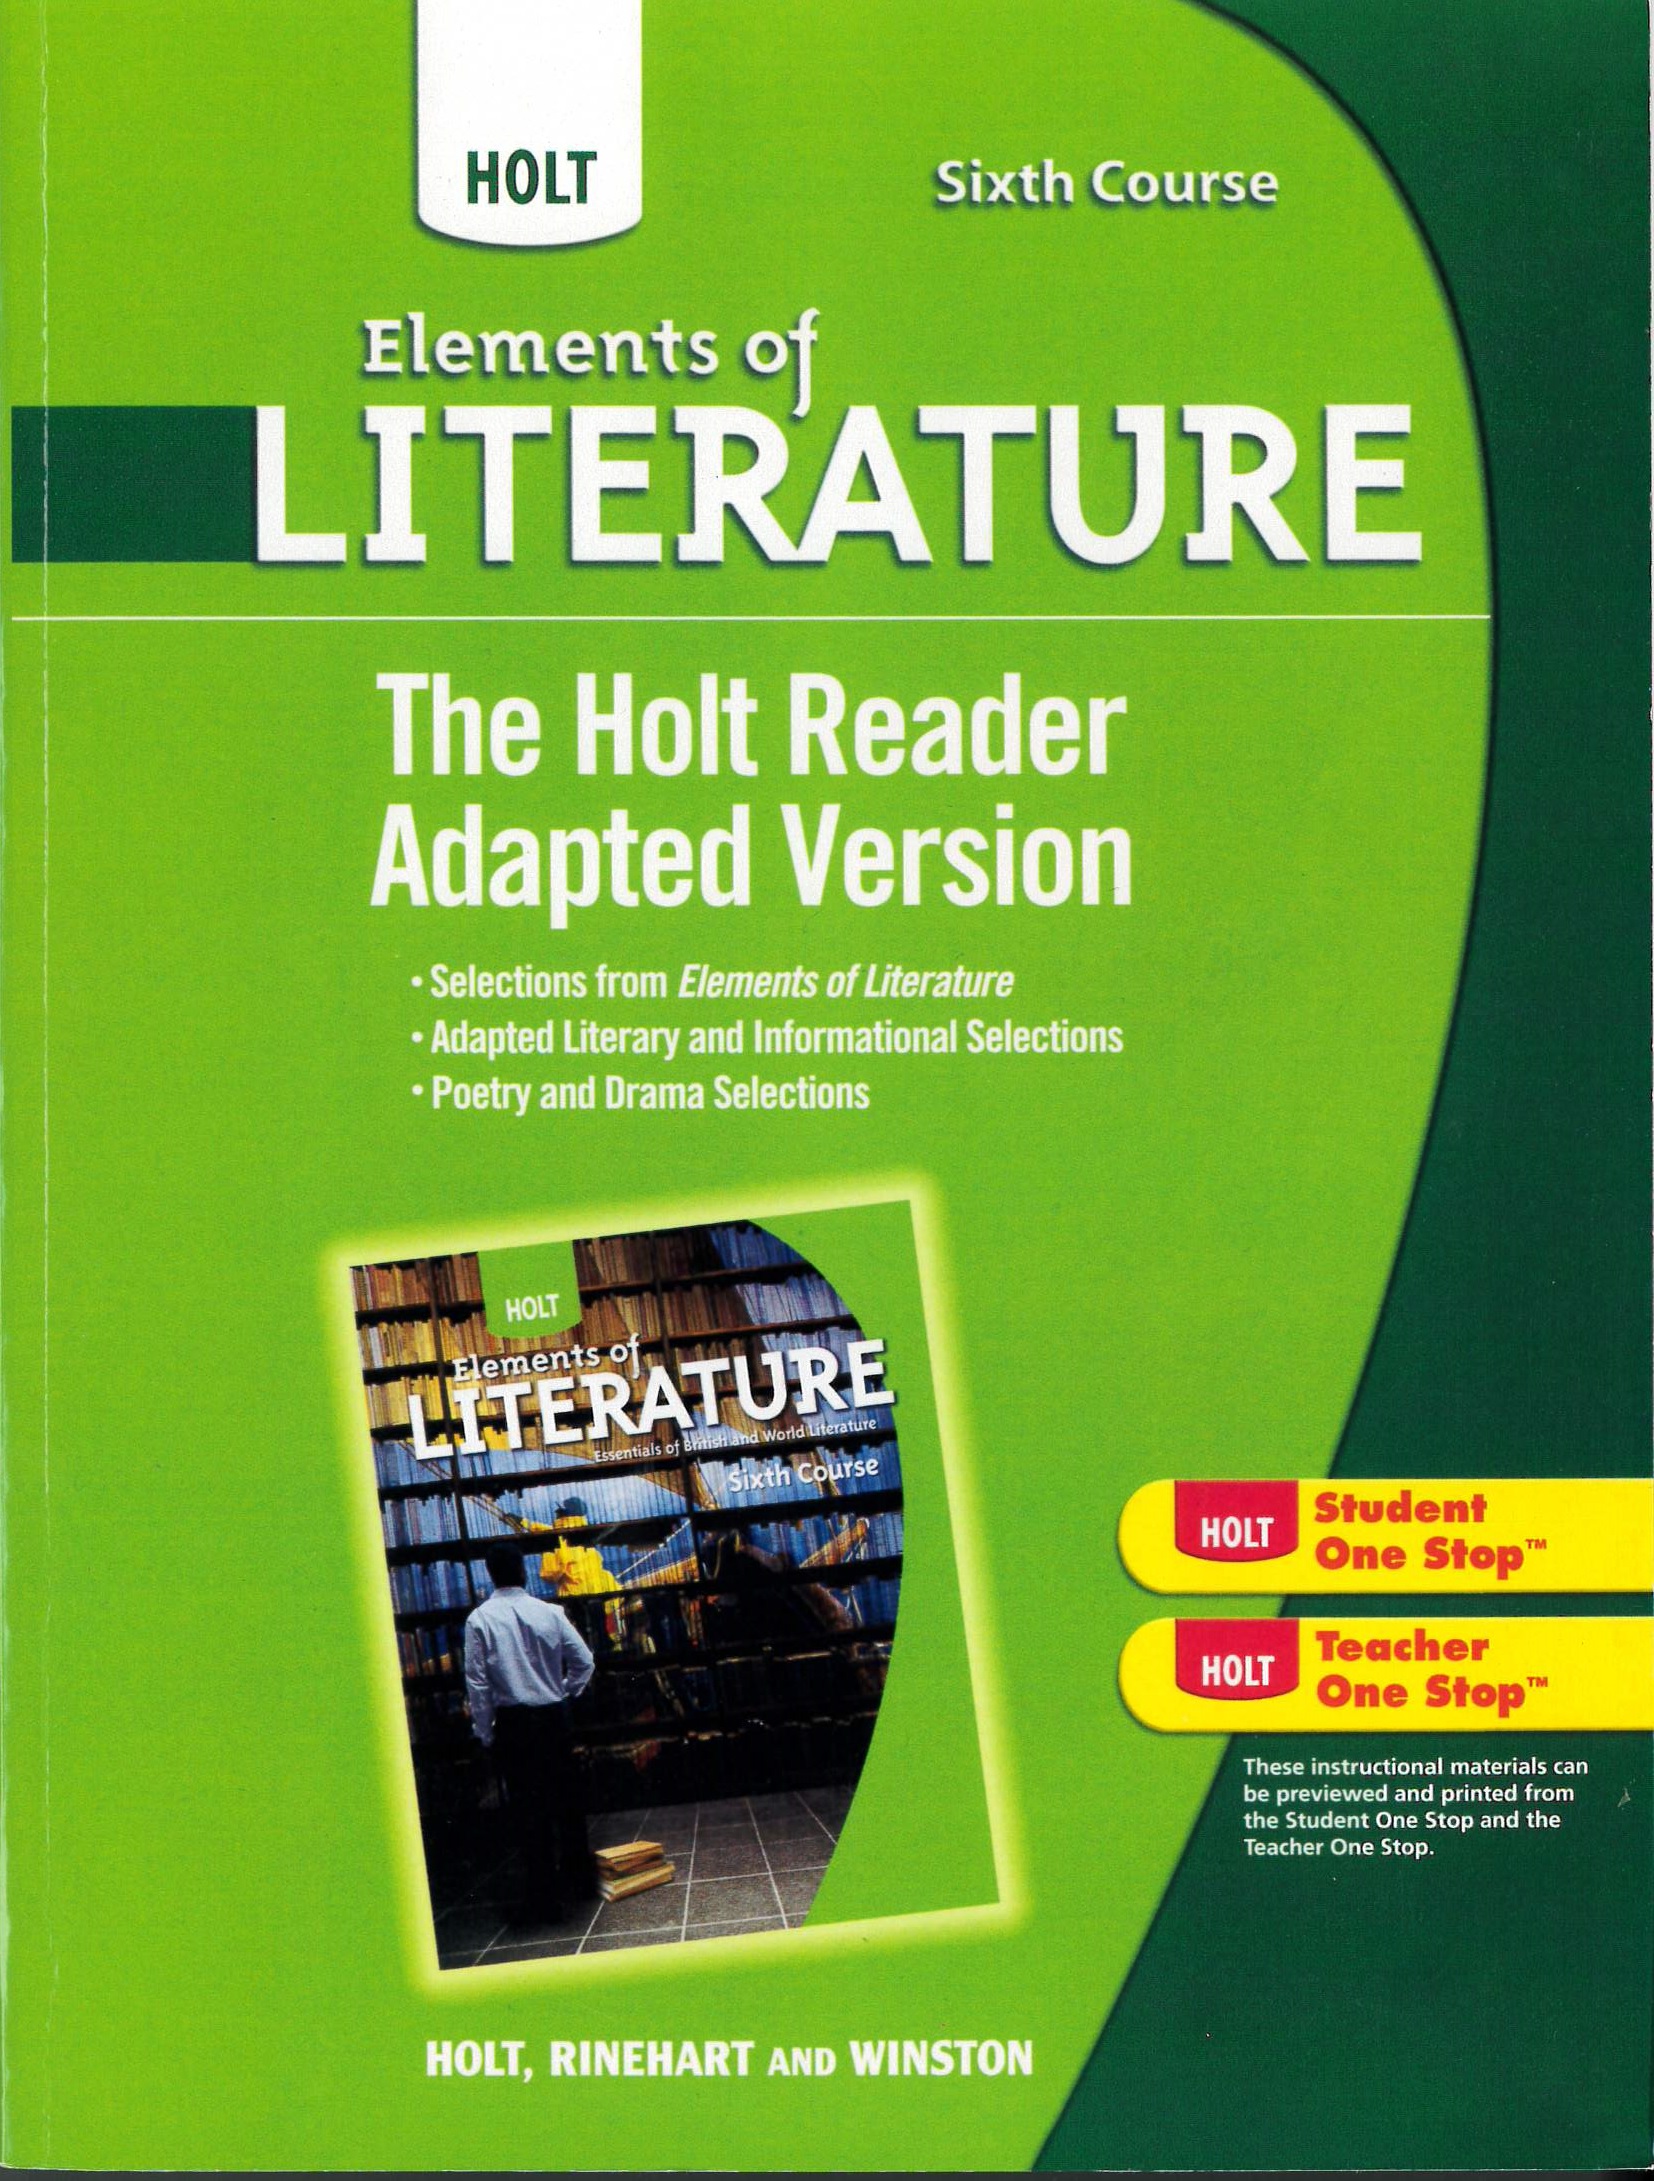 The holt reader, adapted version [Sixth Course]